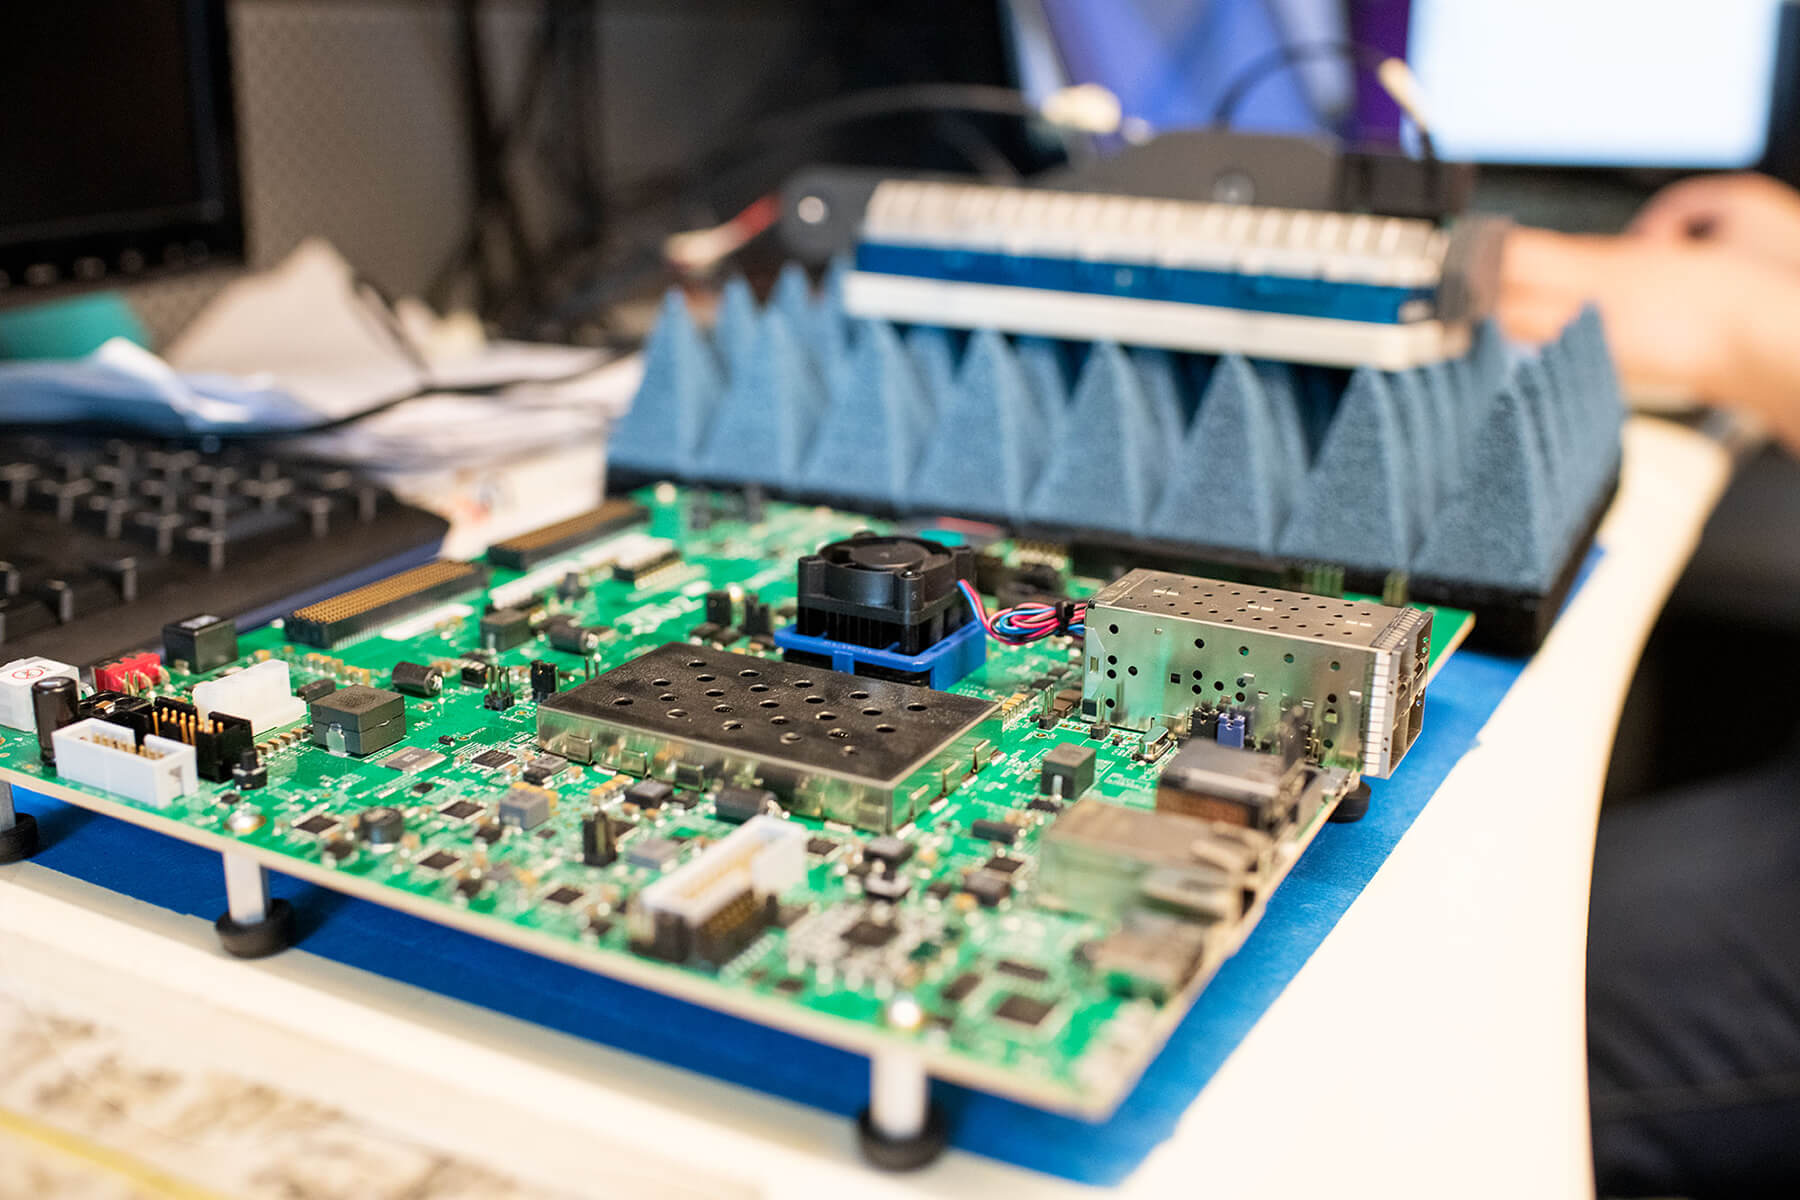 Close-up of an exposed circuit board on a desk connected to a compact radar system resting on foam in the background.